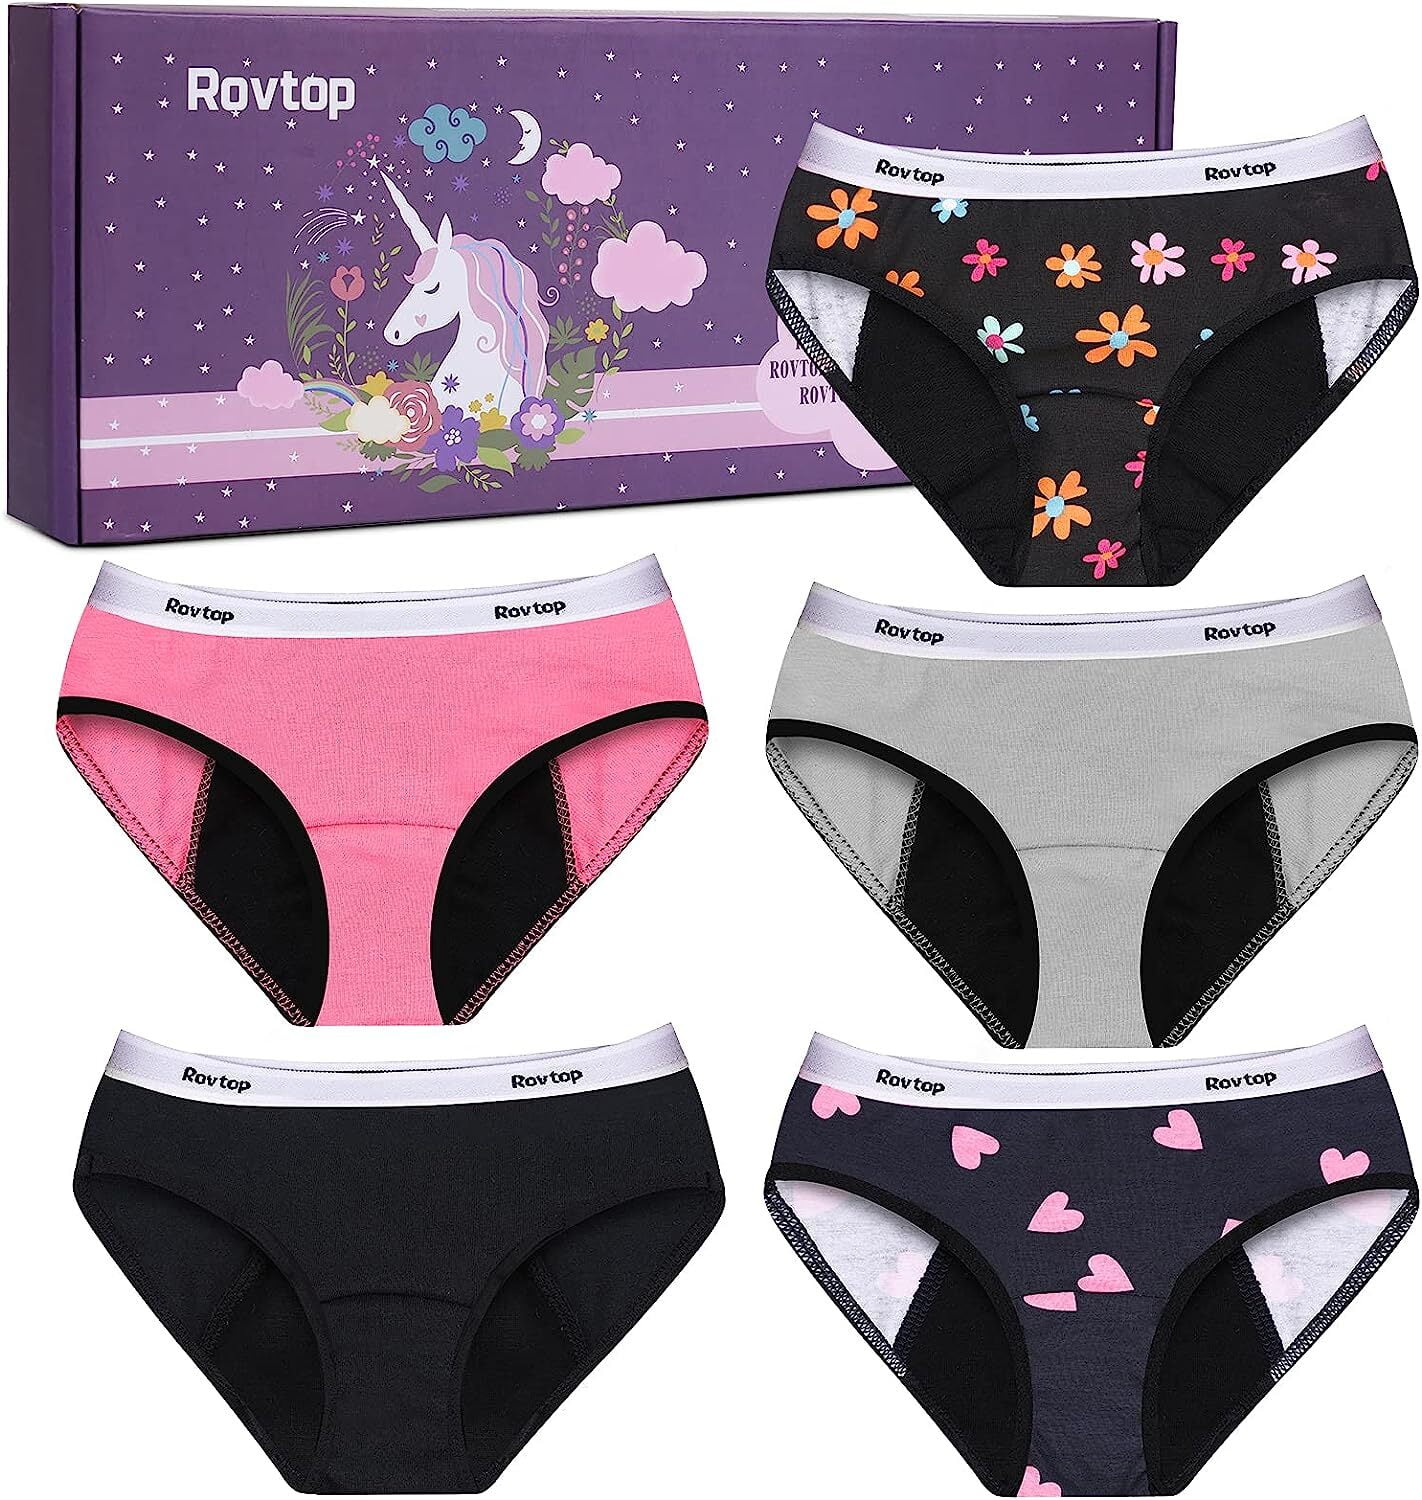 New in: period panties for teens and tweens. They're expertly designed with  4 layers of protection to have the same absorption capabili